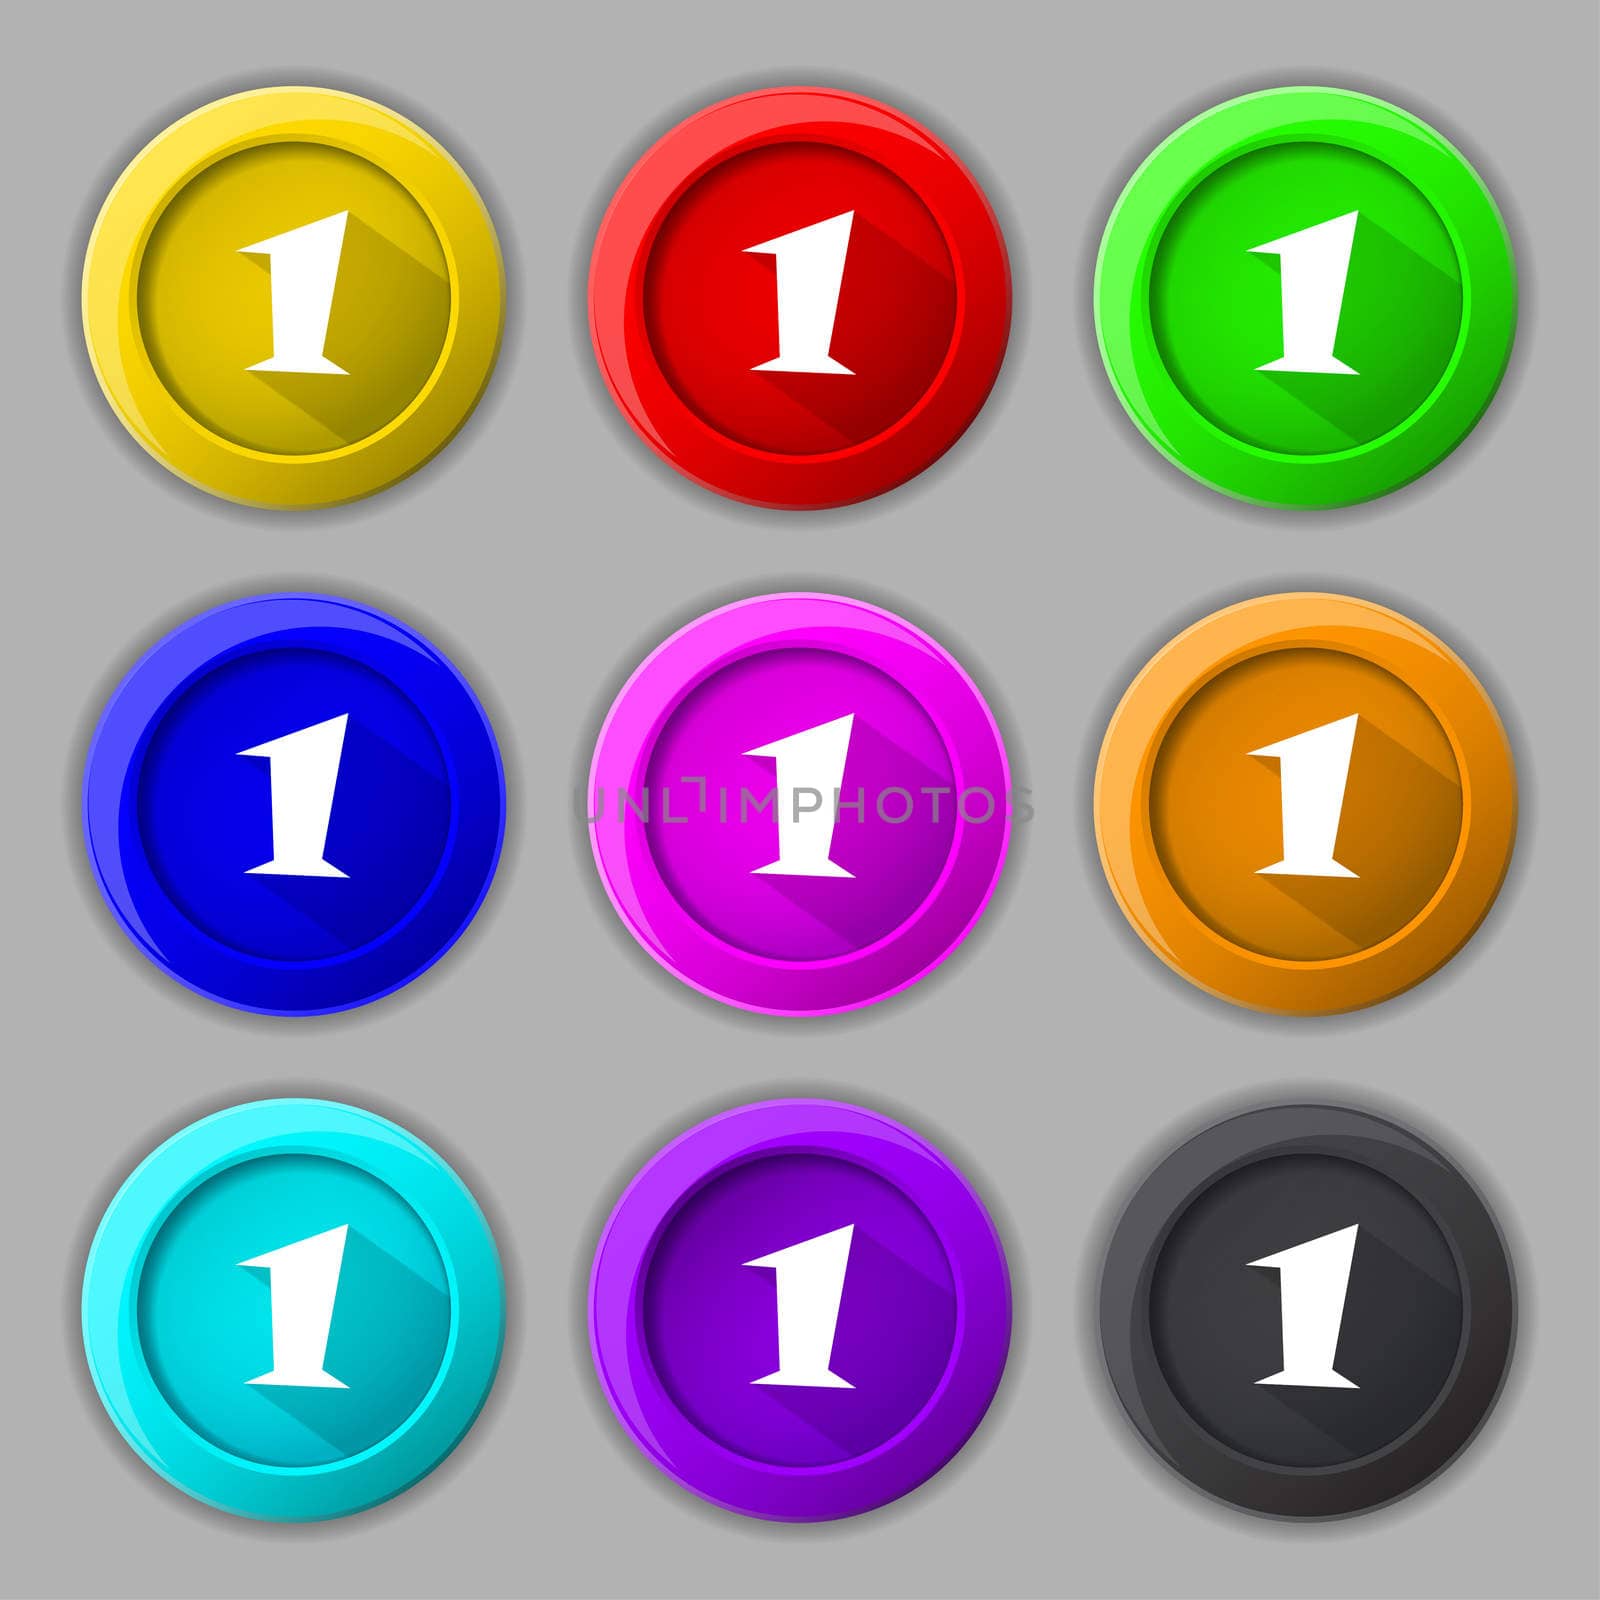 First place award sign. Winner symbol. Step one. Set of coloured buttons. illustration